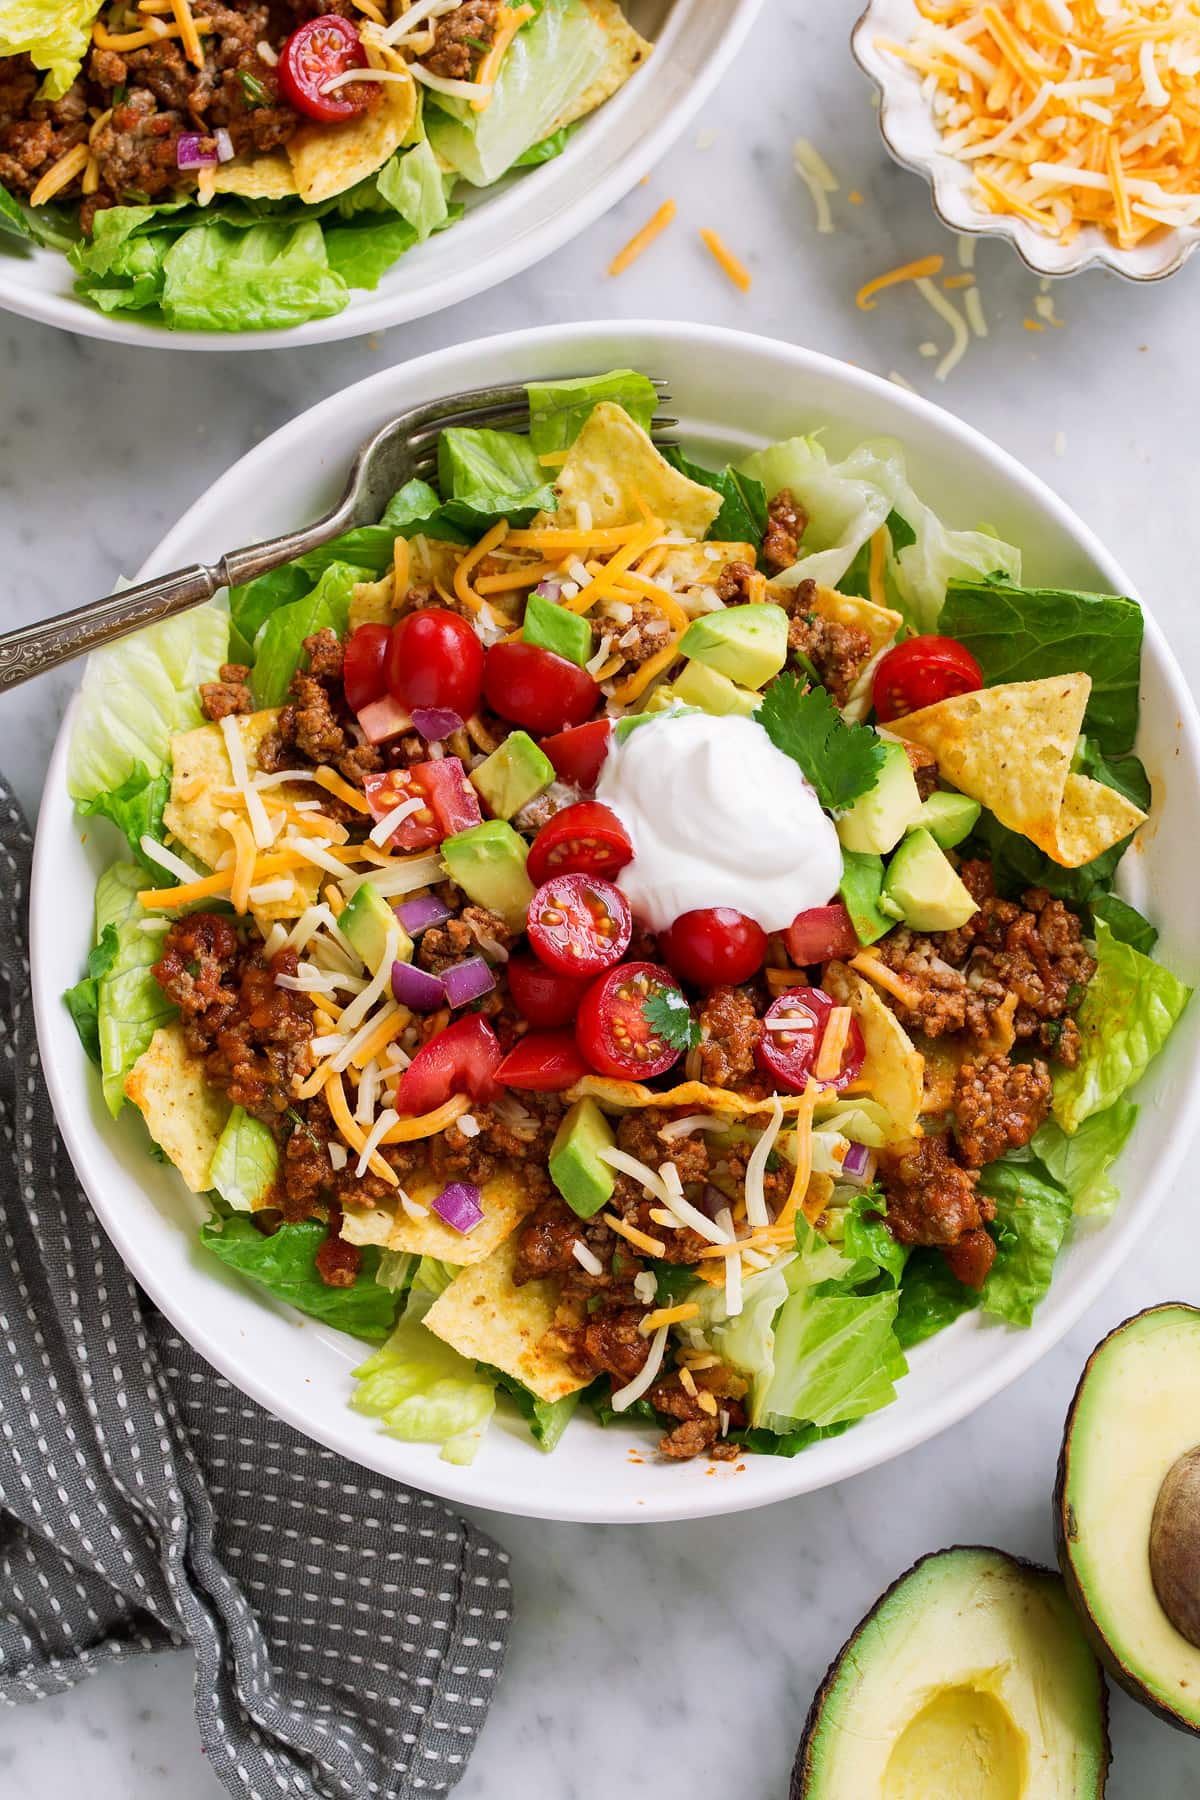 Taco Salad in a white individual serving bowl set over a marble surface. Taco salad is layered with romaine lettuce, seasoned ground beef, cheese, tomatoes, avocado and sour cream.